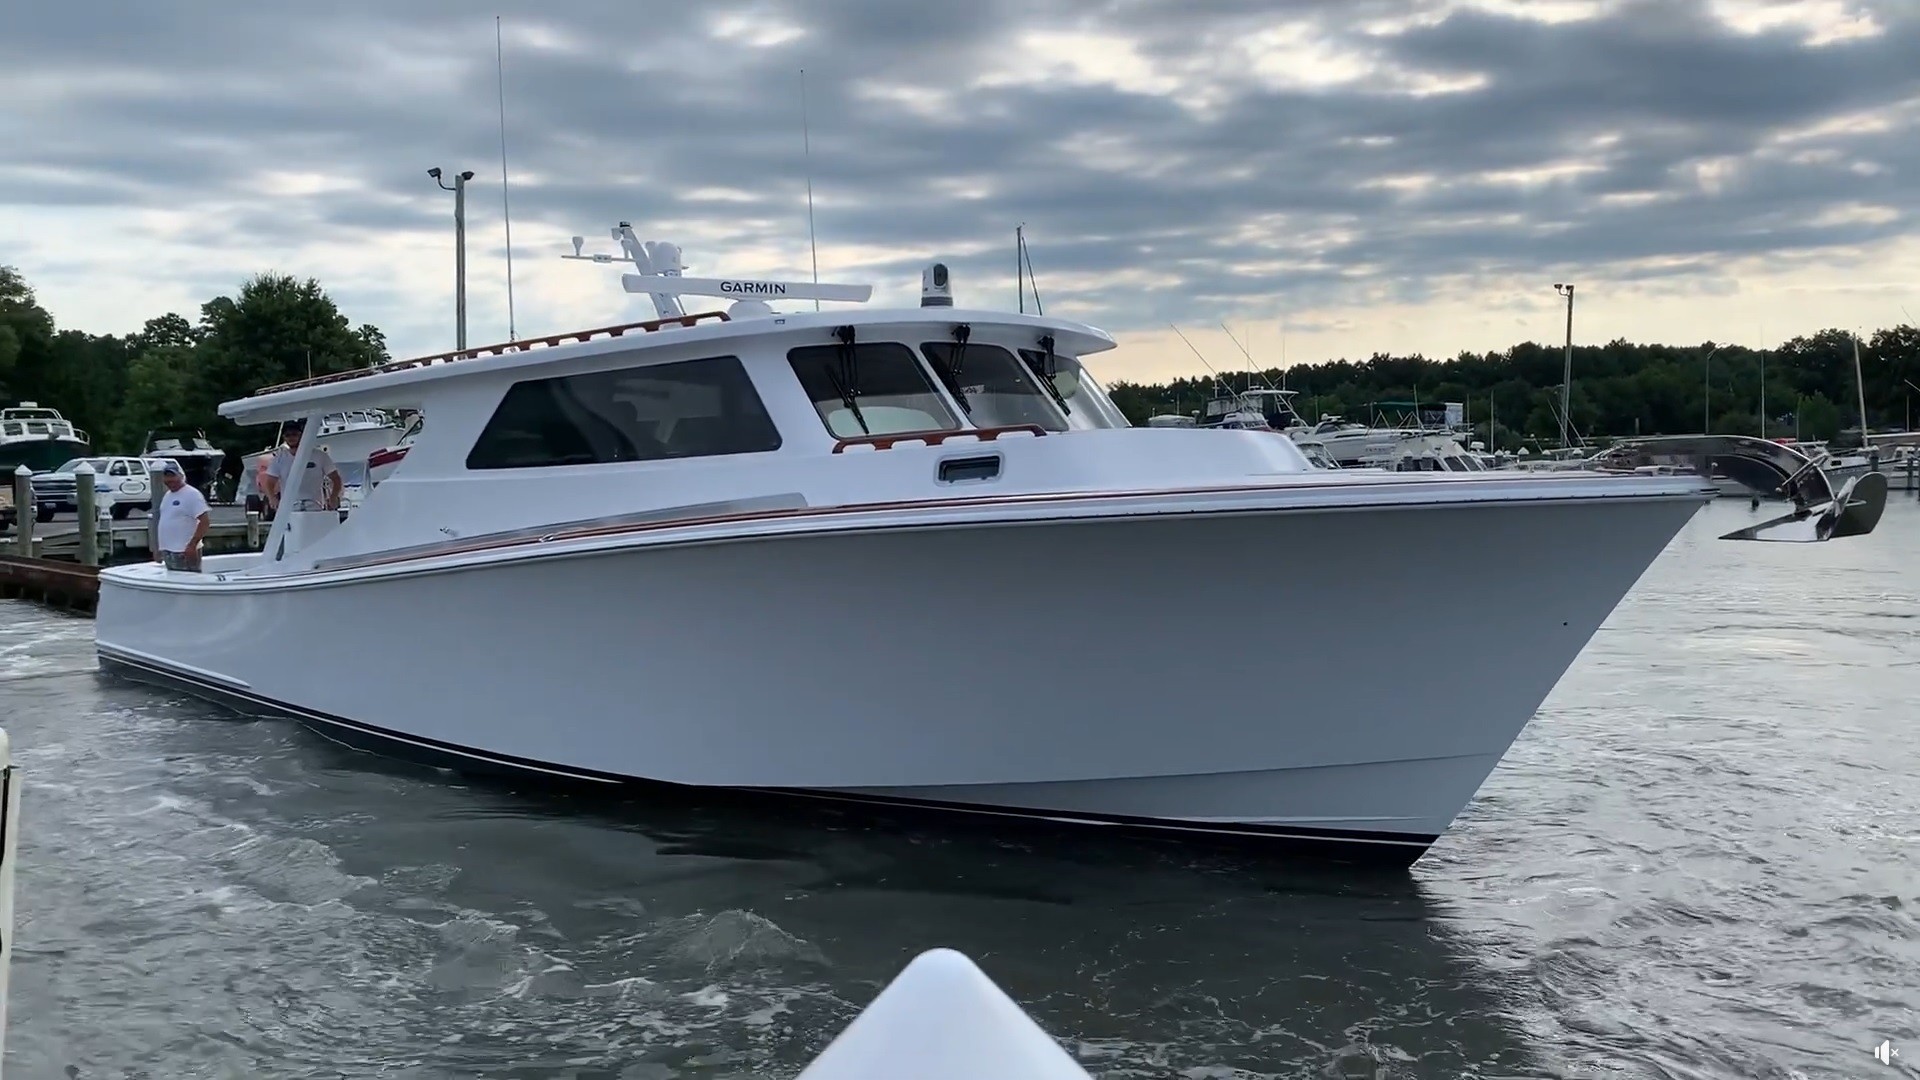 Composite Yacht's New CY55 Is an Easily Customizable Sportfishing Boat -  autoevolution